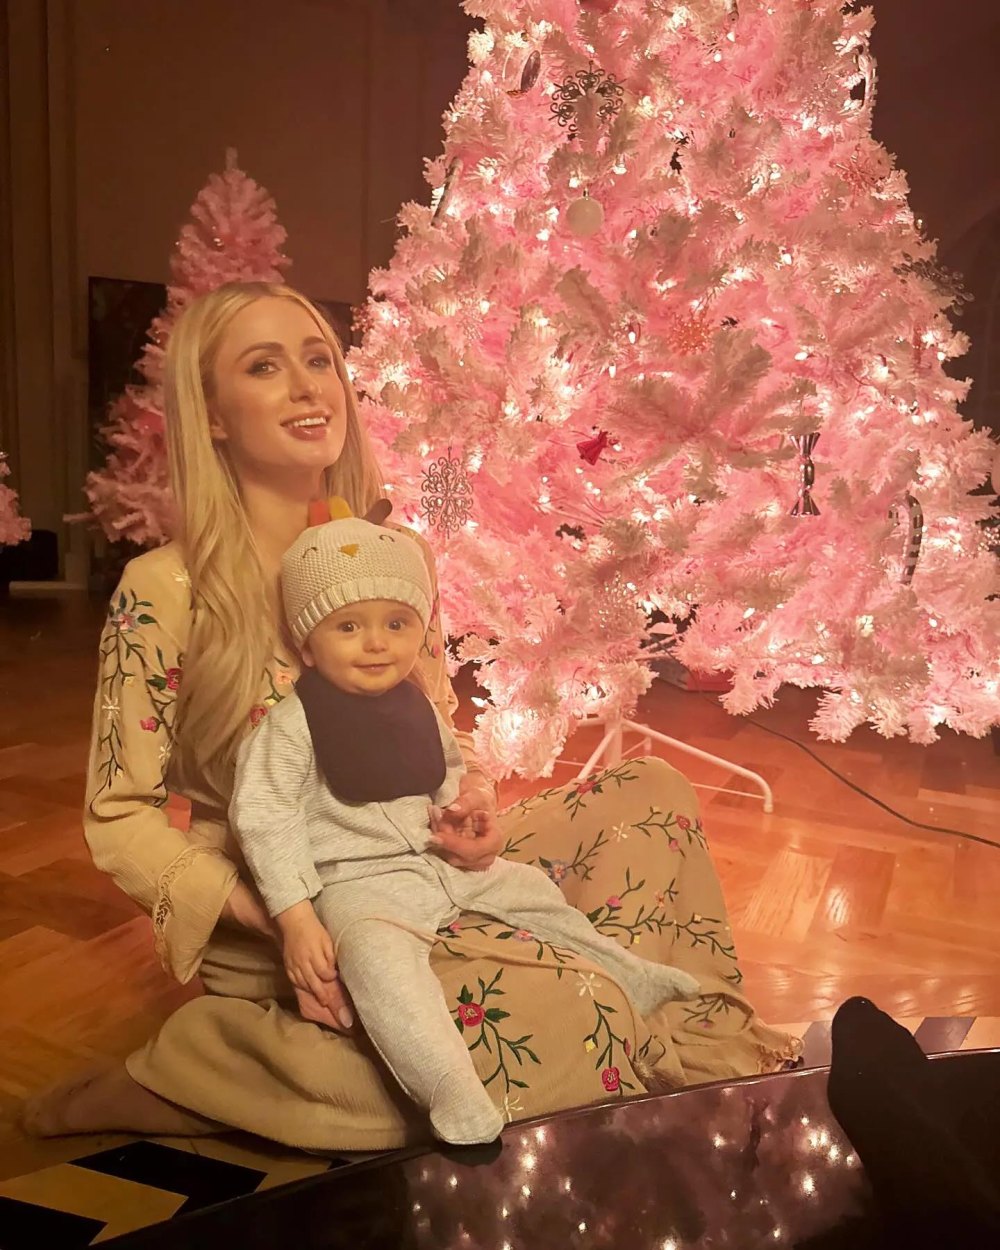 Paris Hilton Is Planning the ‘Most Magical’ Christmas With 2 Kids: It's 'Everything She Ever Wanted'